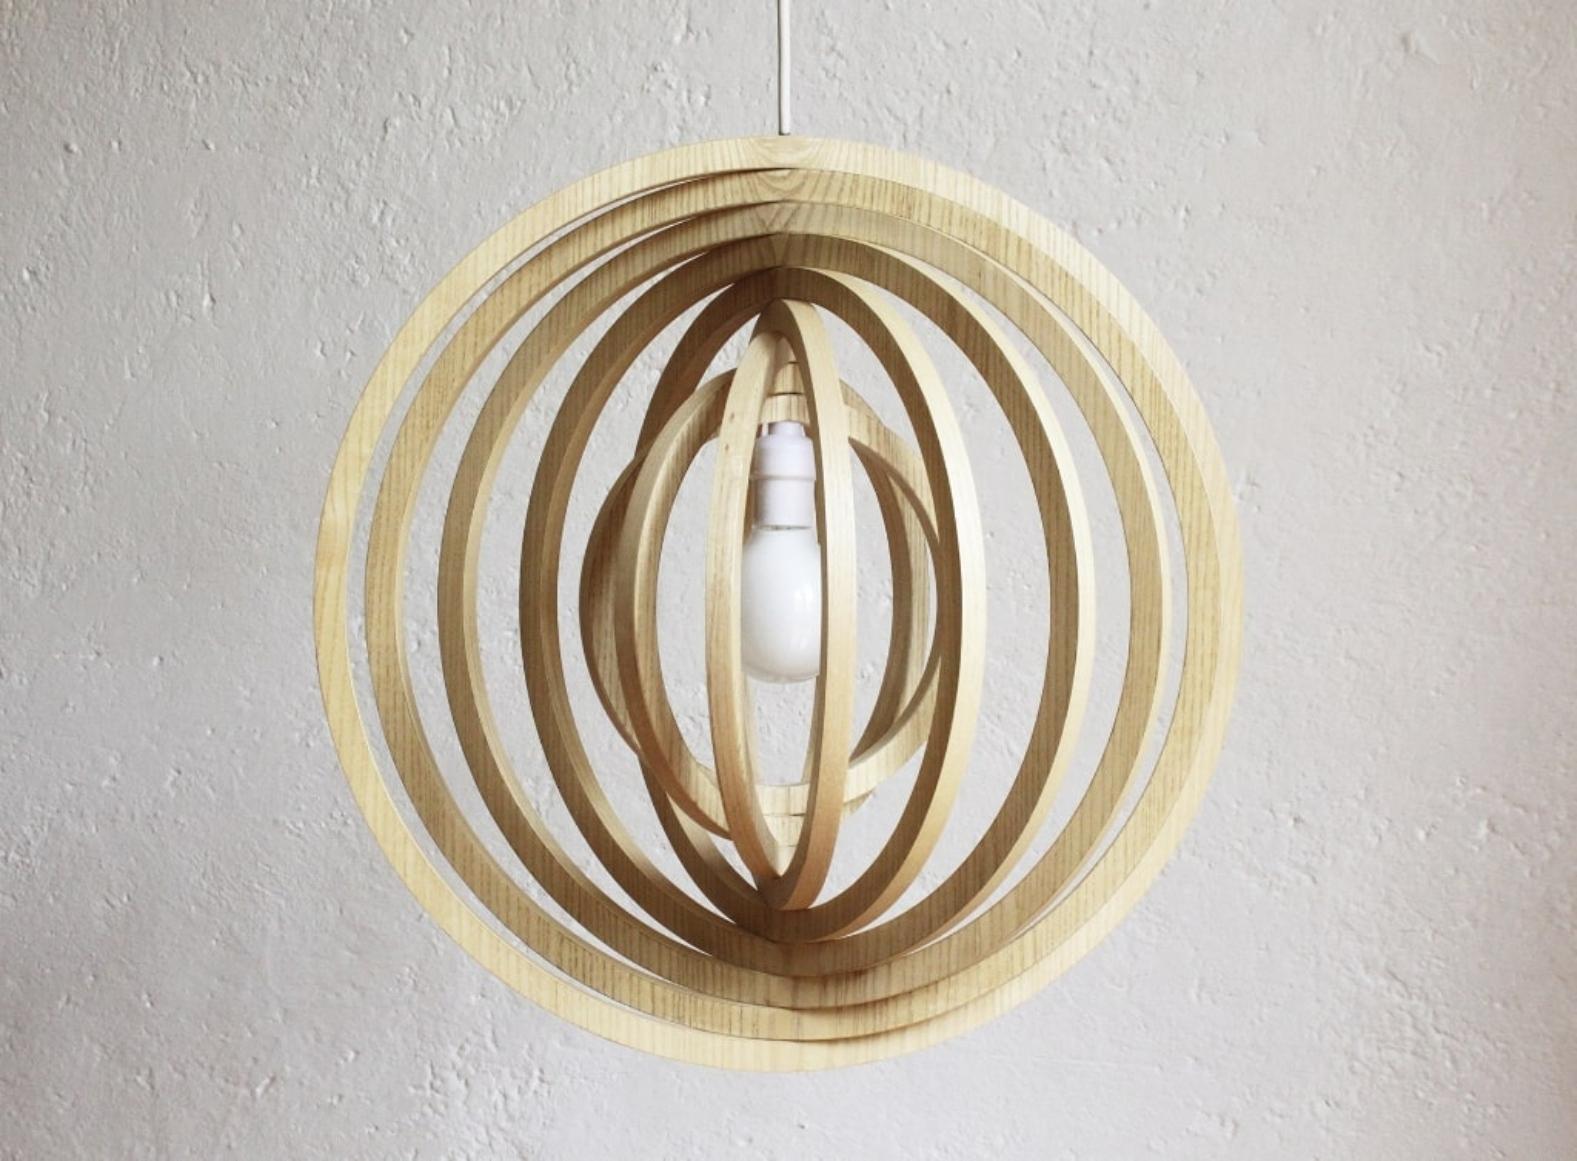 Wood Engiro Ceiling Light, Maria Beckmann, Represented by Tuleste Factory